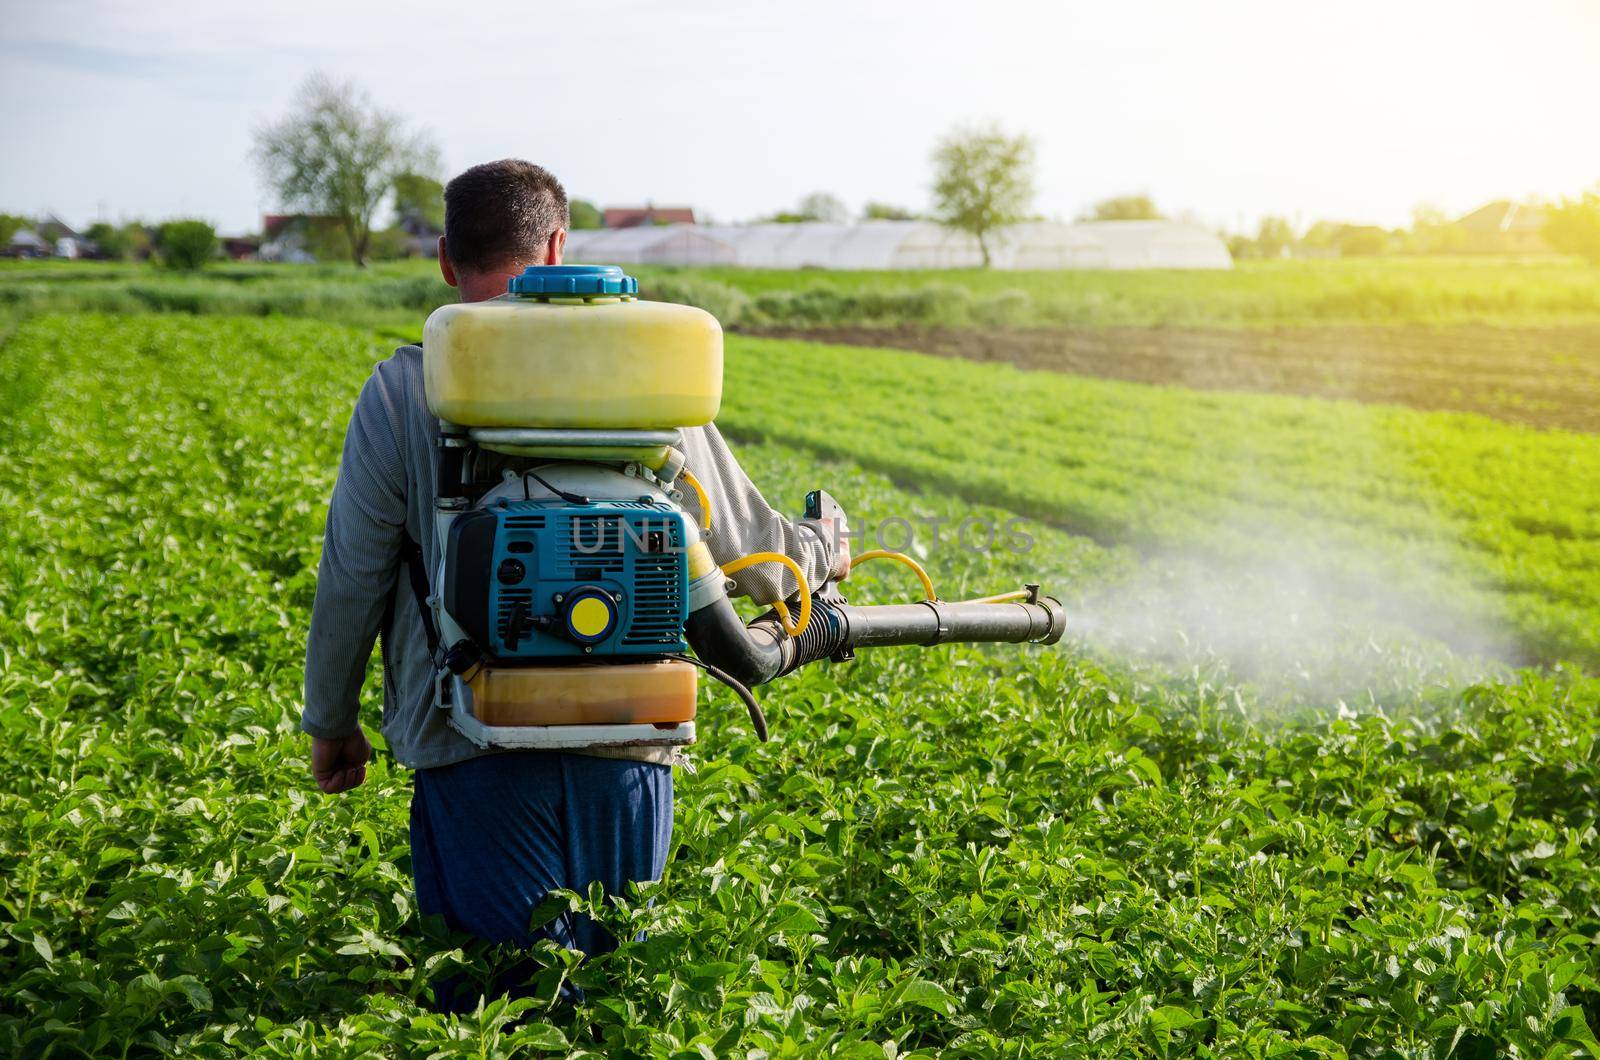 A farmer with a mist fogger sprayer sprays fungicide and pesticide on potato bushes. Effective crop protection, environmental impact. Protection of cultivated plants from insects and fungal infections